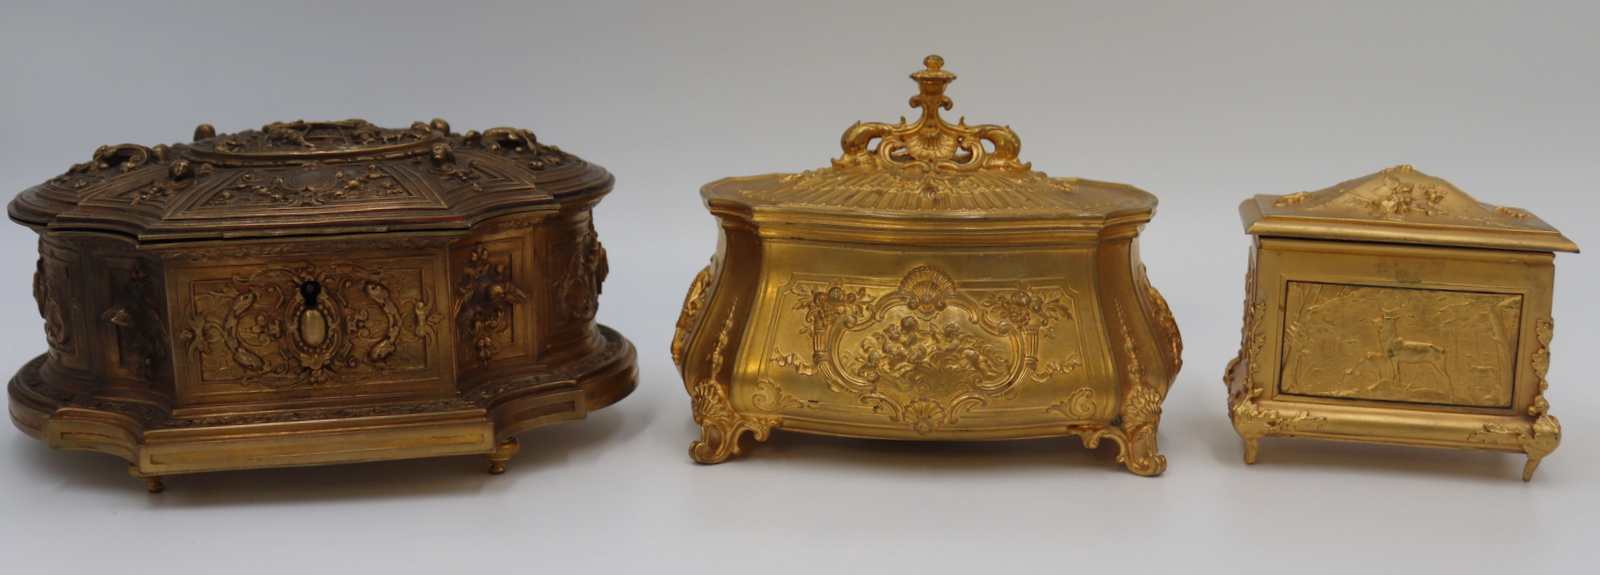 GROUPING OF 3 GILT TRINKET BOXES  3be83e